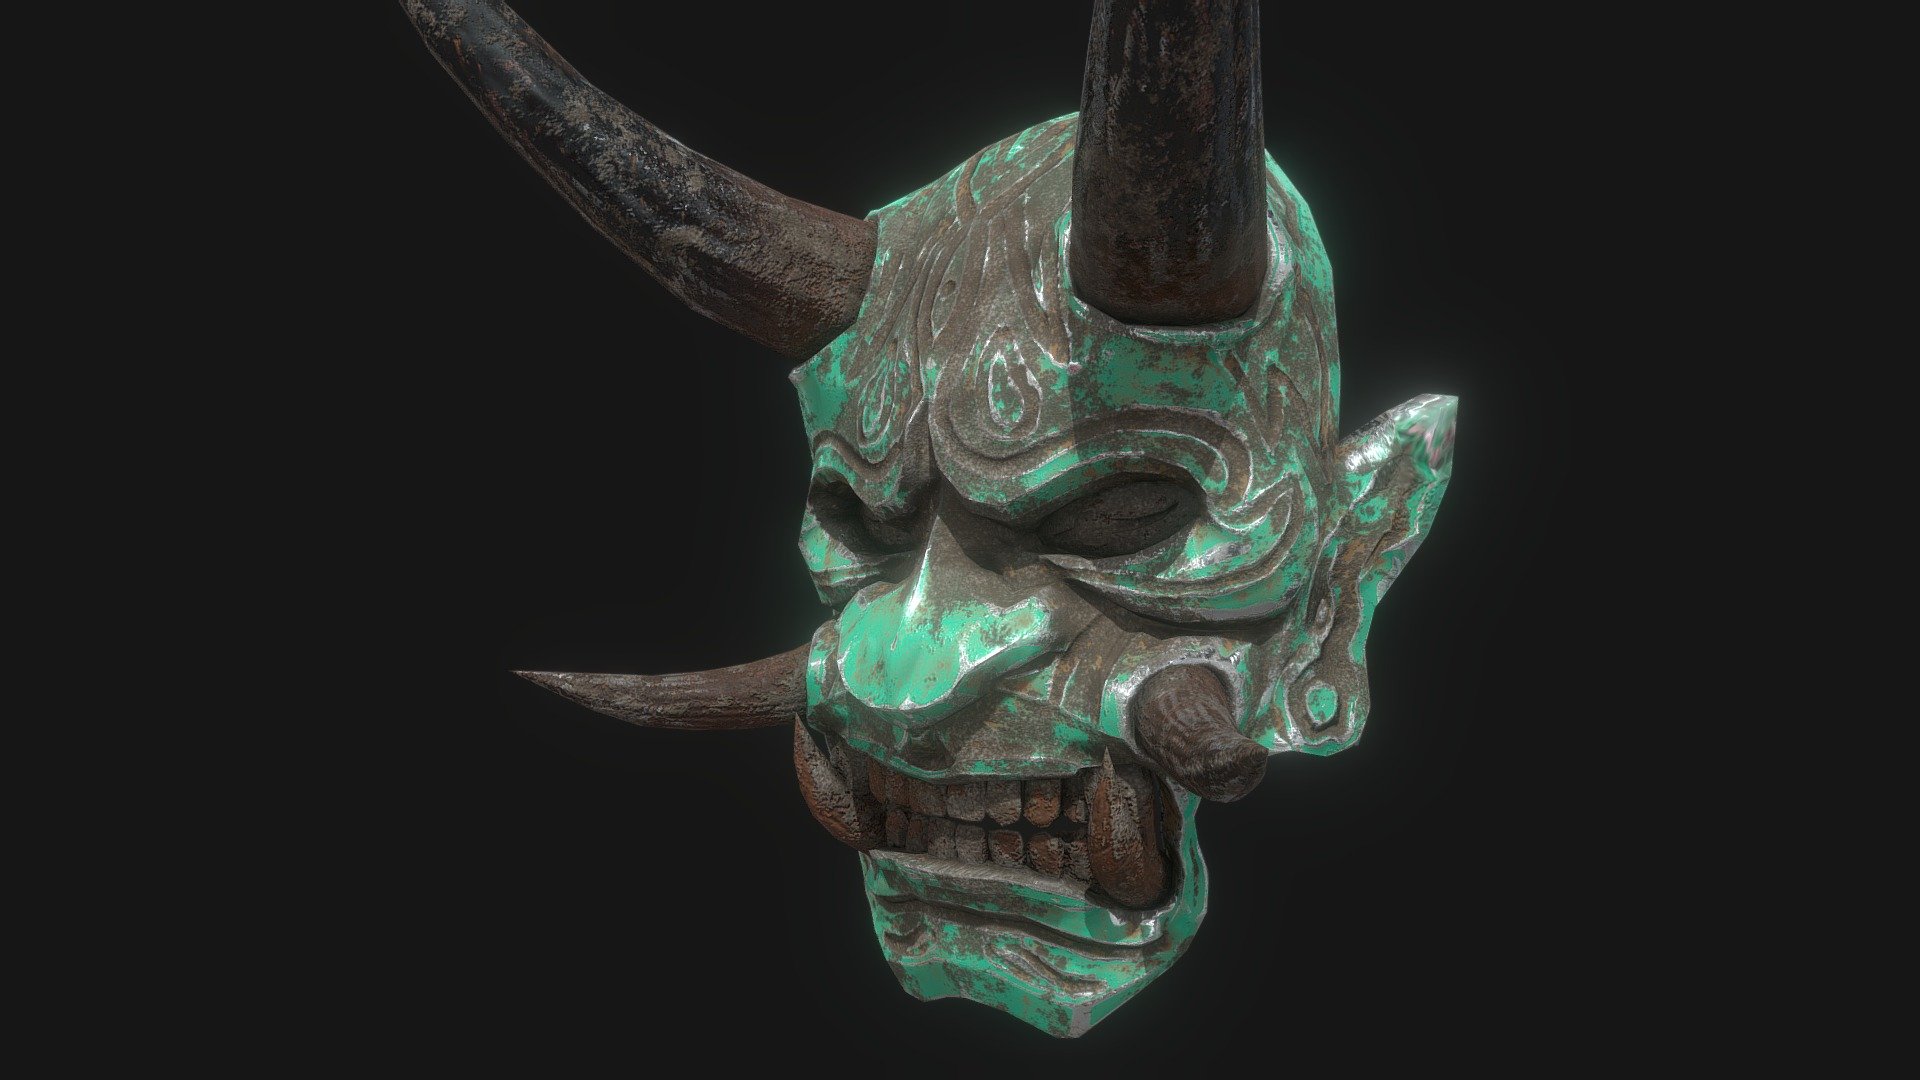 A samurai Oni Mask!

Designed for games in Low-poly PBR including Albedo, Normal, Metallic, AO, and Roughness 2K textures.

This model from Ferocious Industries can be found in 3 different material skins, and this one uses the ‘Teal’ texture set.

4866 Triangles 3d model